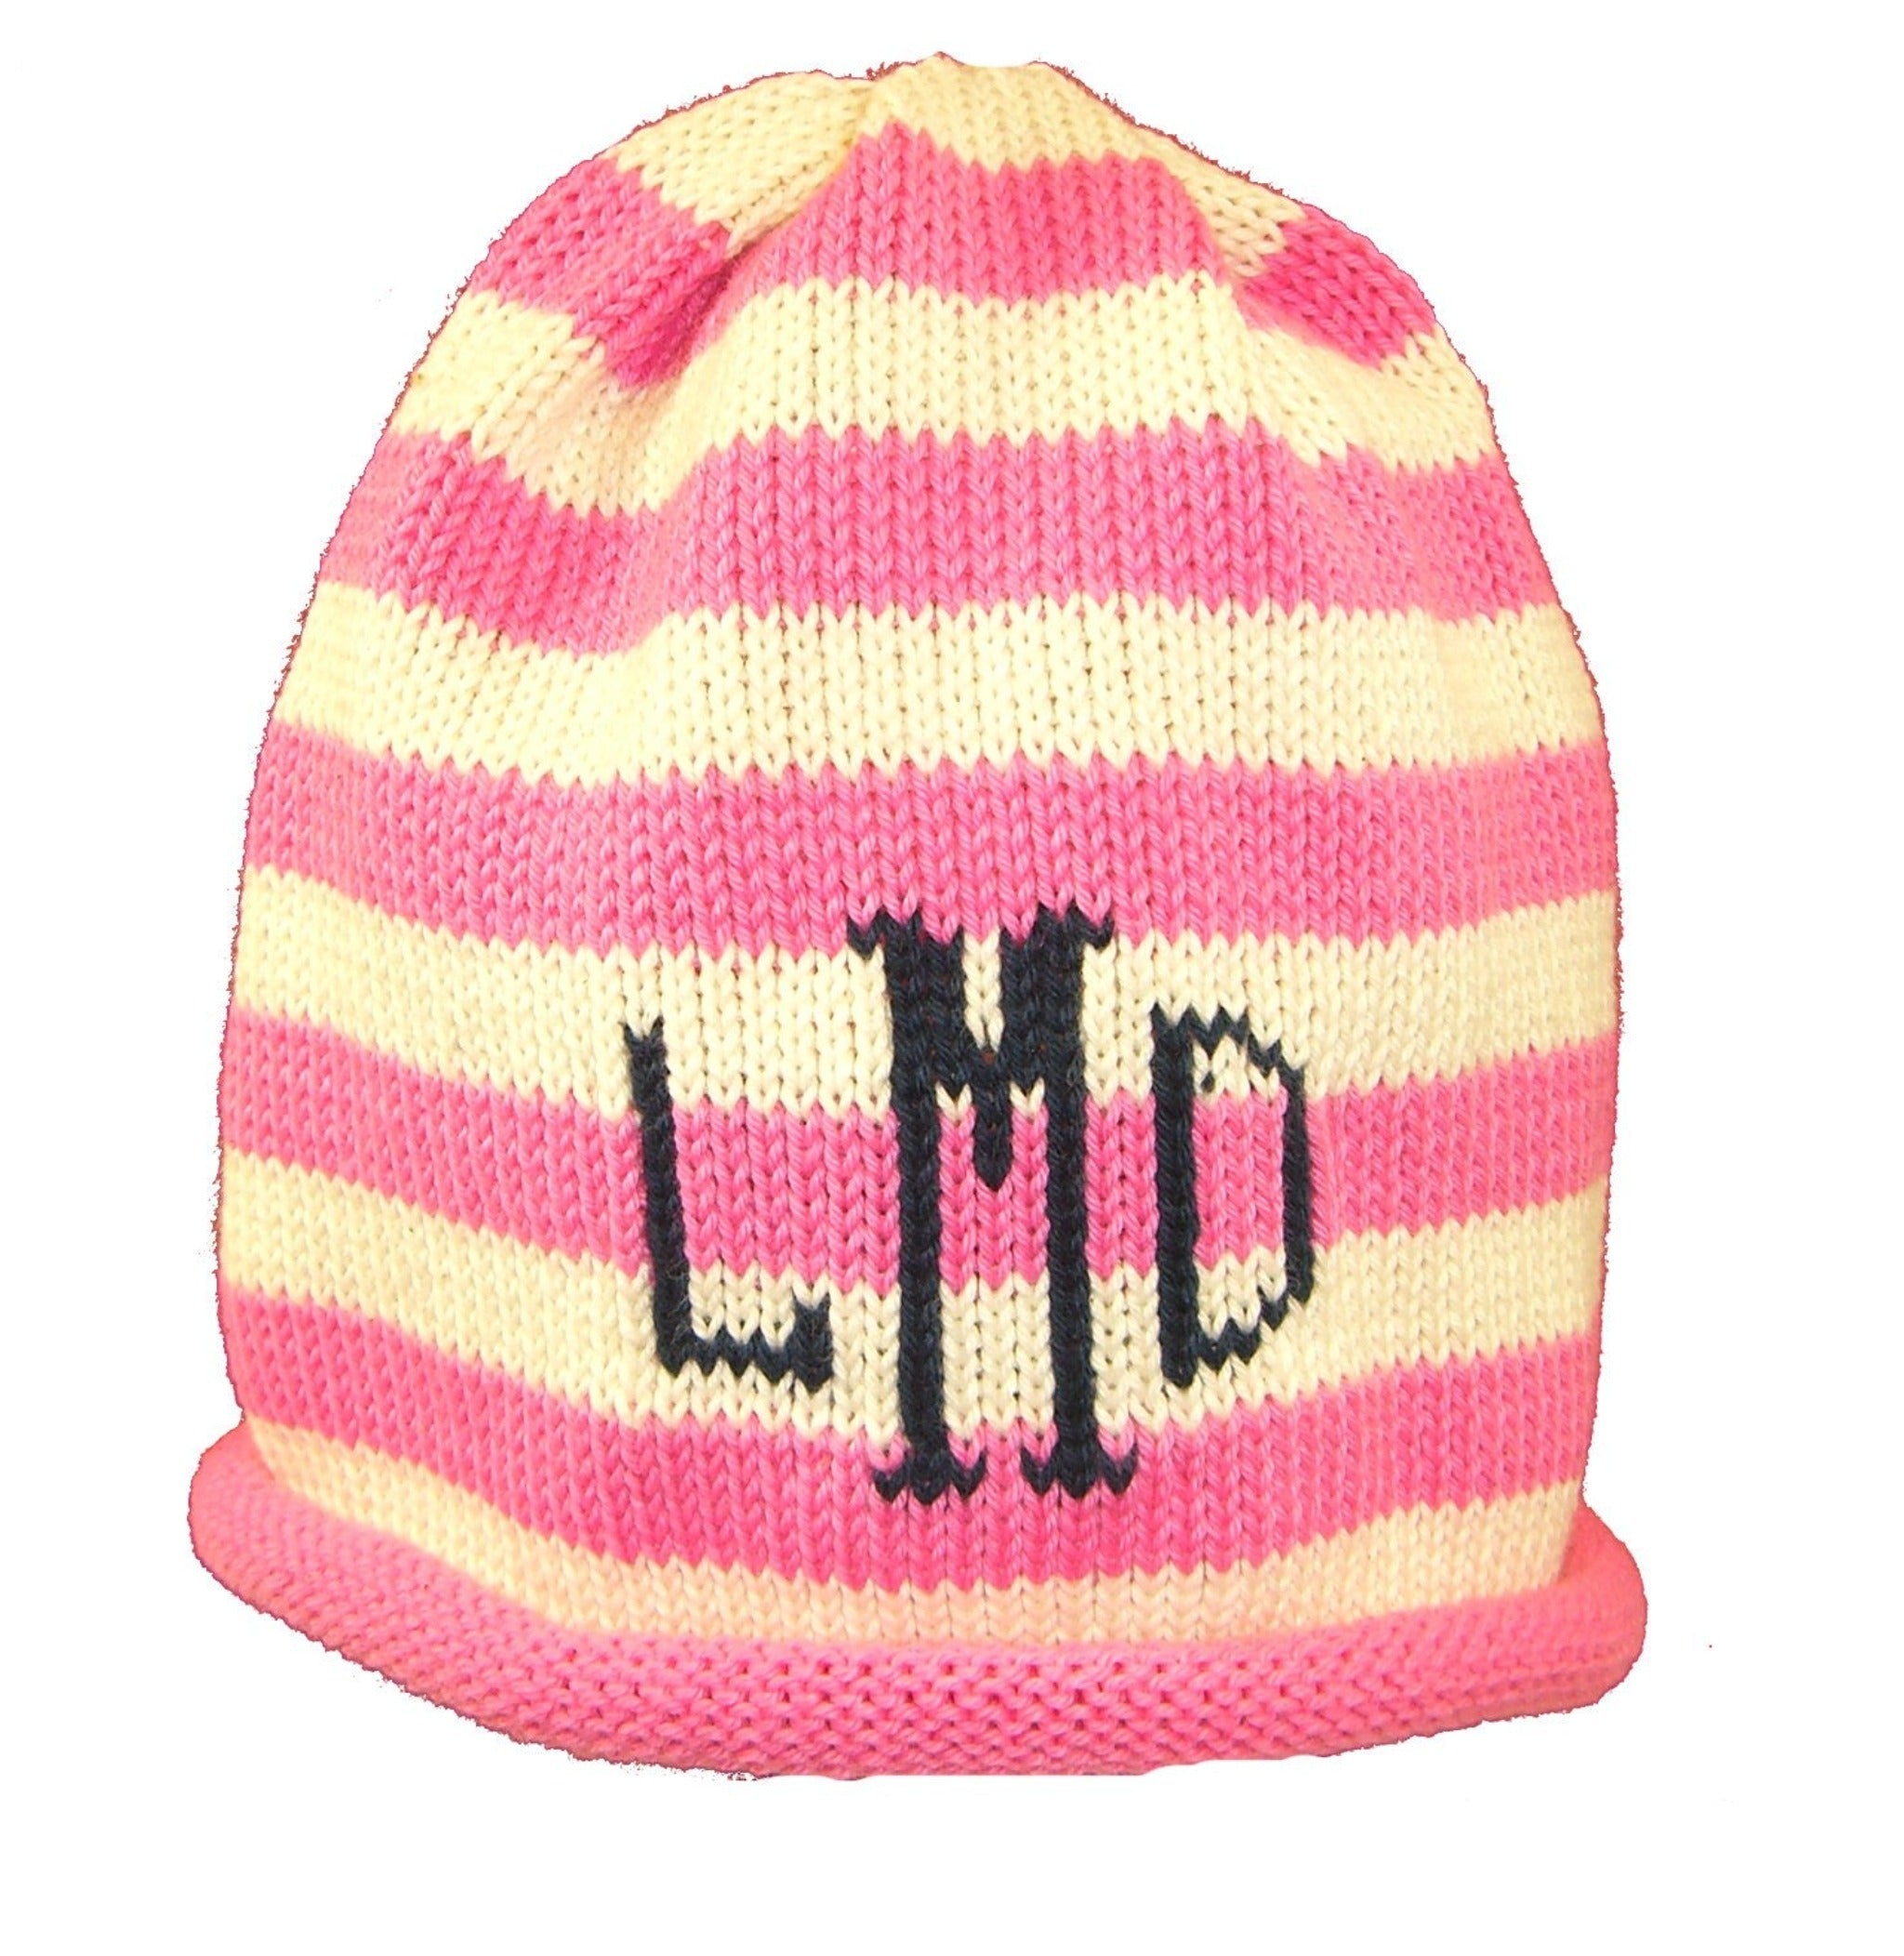 Striped Roll Hat with Name or Monogram - Custom Knits for Baby